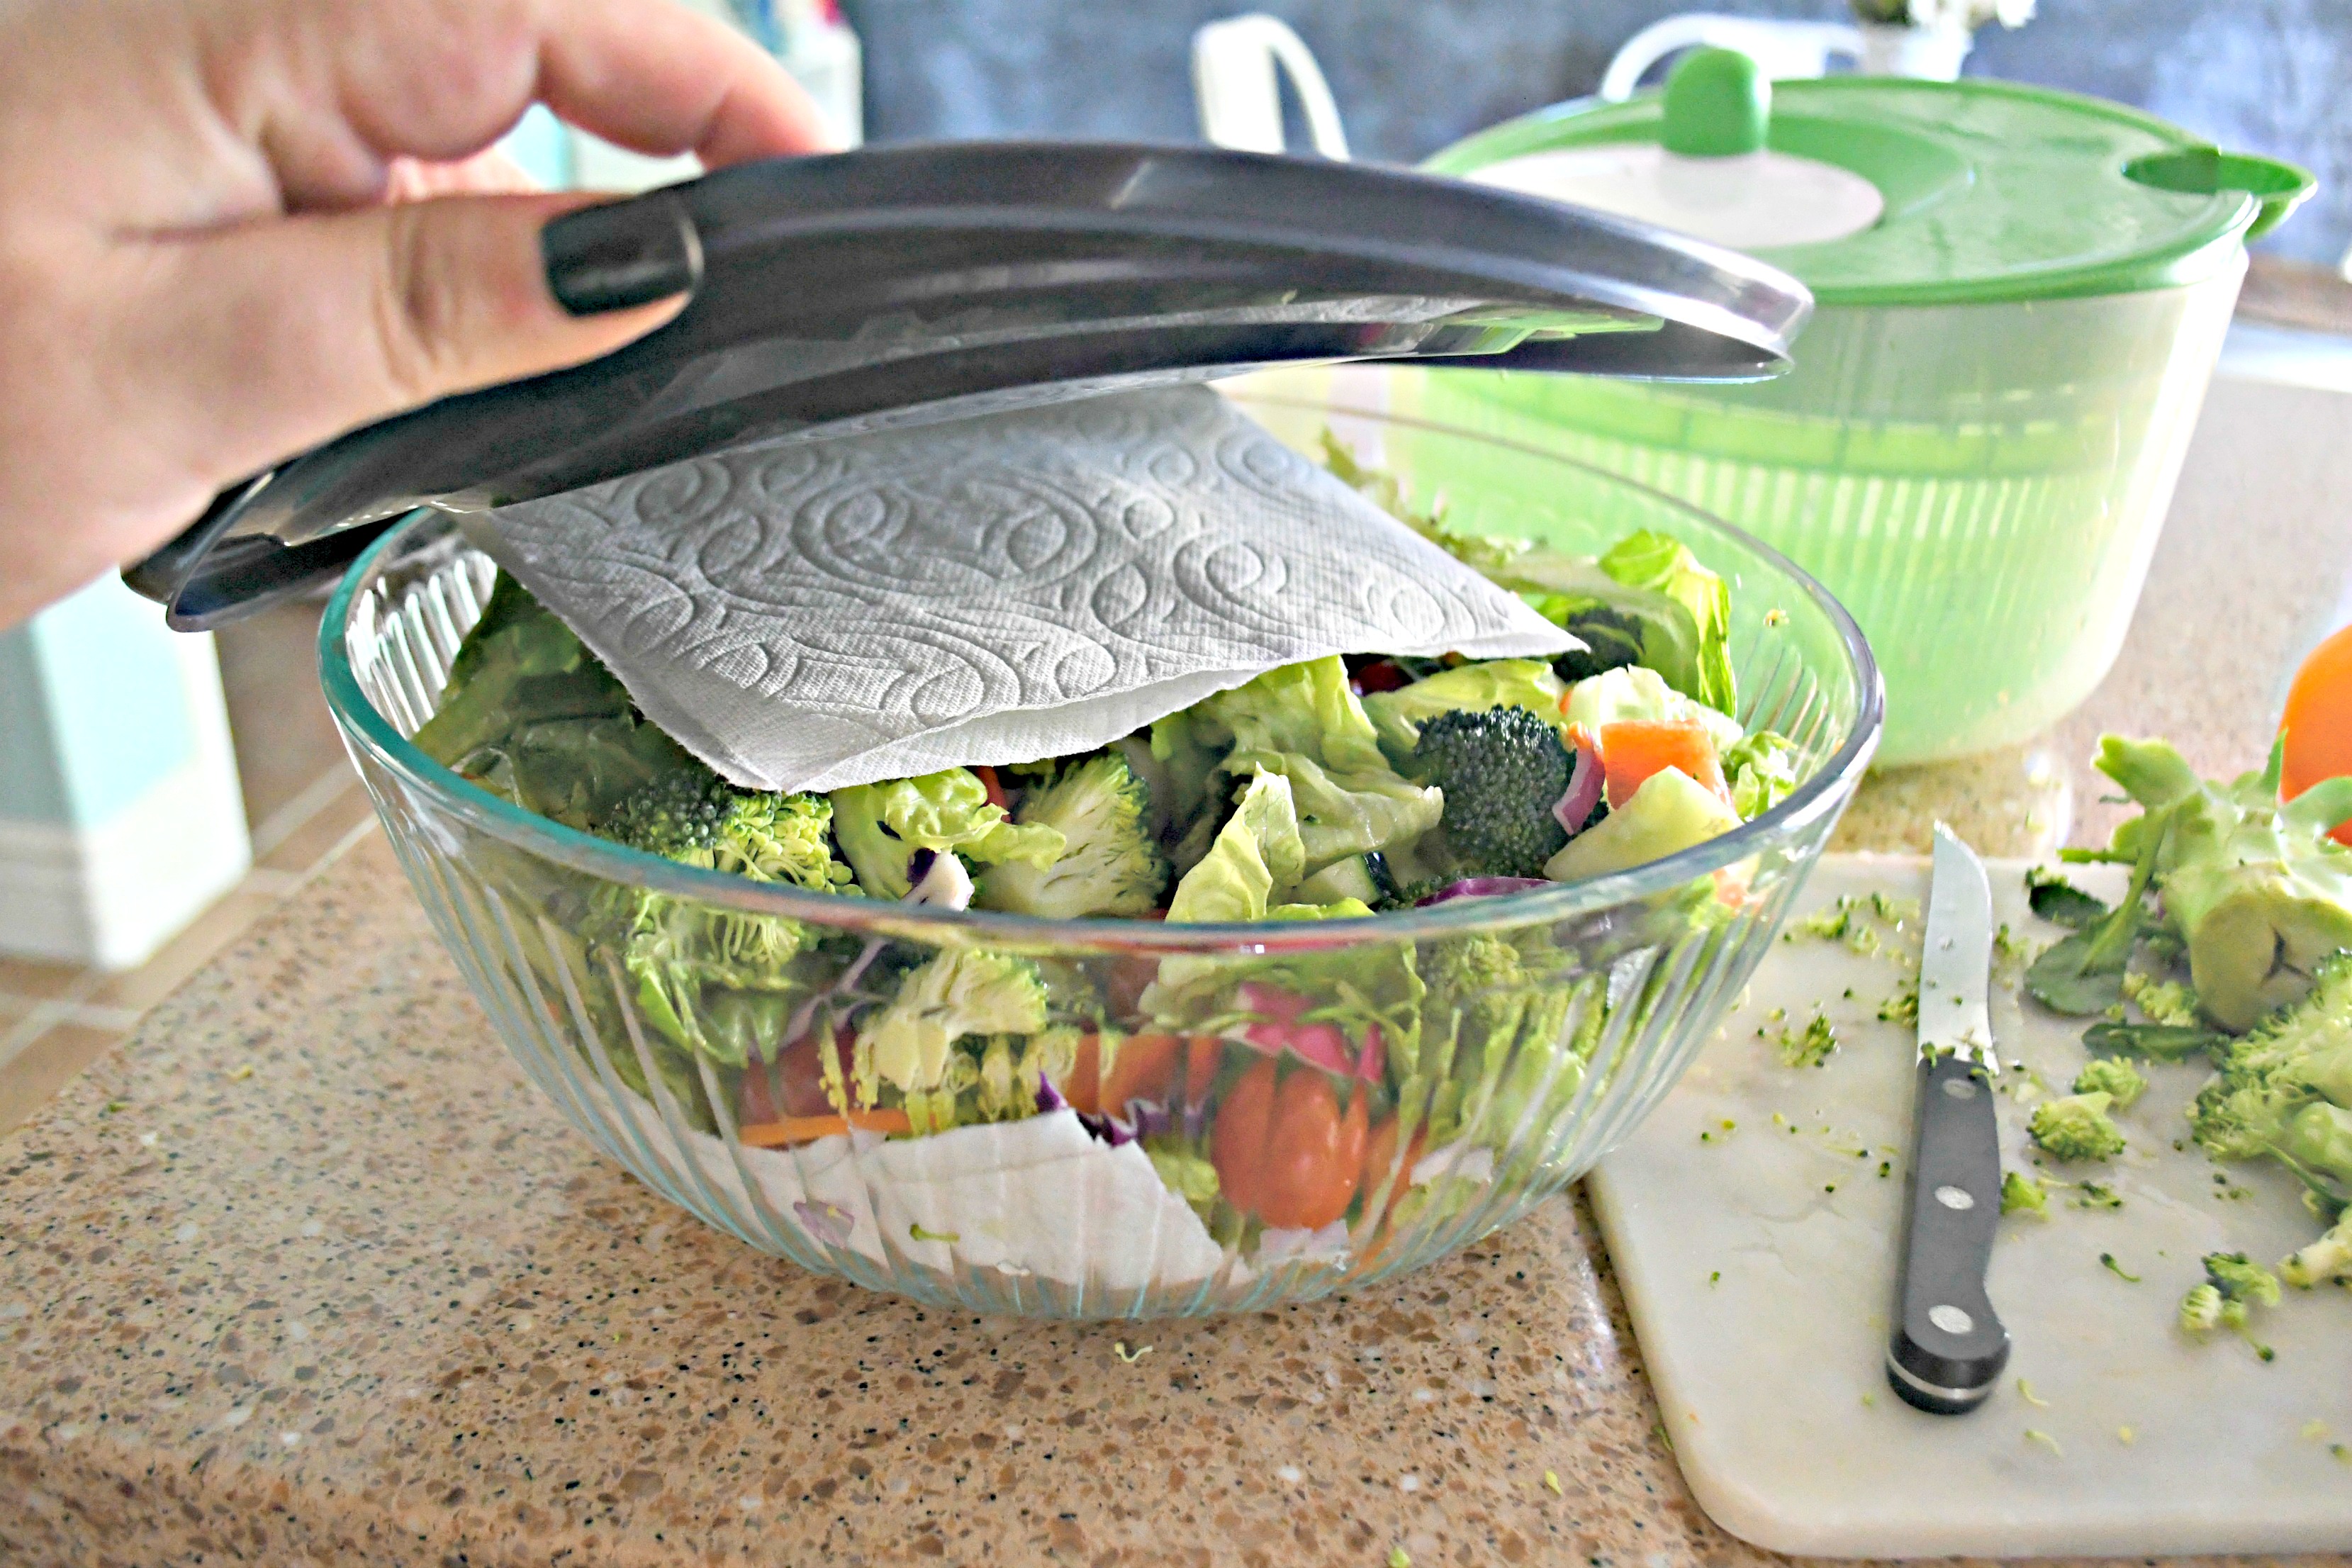 Storing my Weekly Sunday Salad Prep and my favorite dressing recipe in a glass storage container.